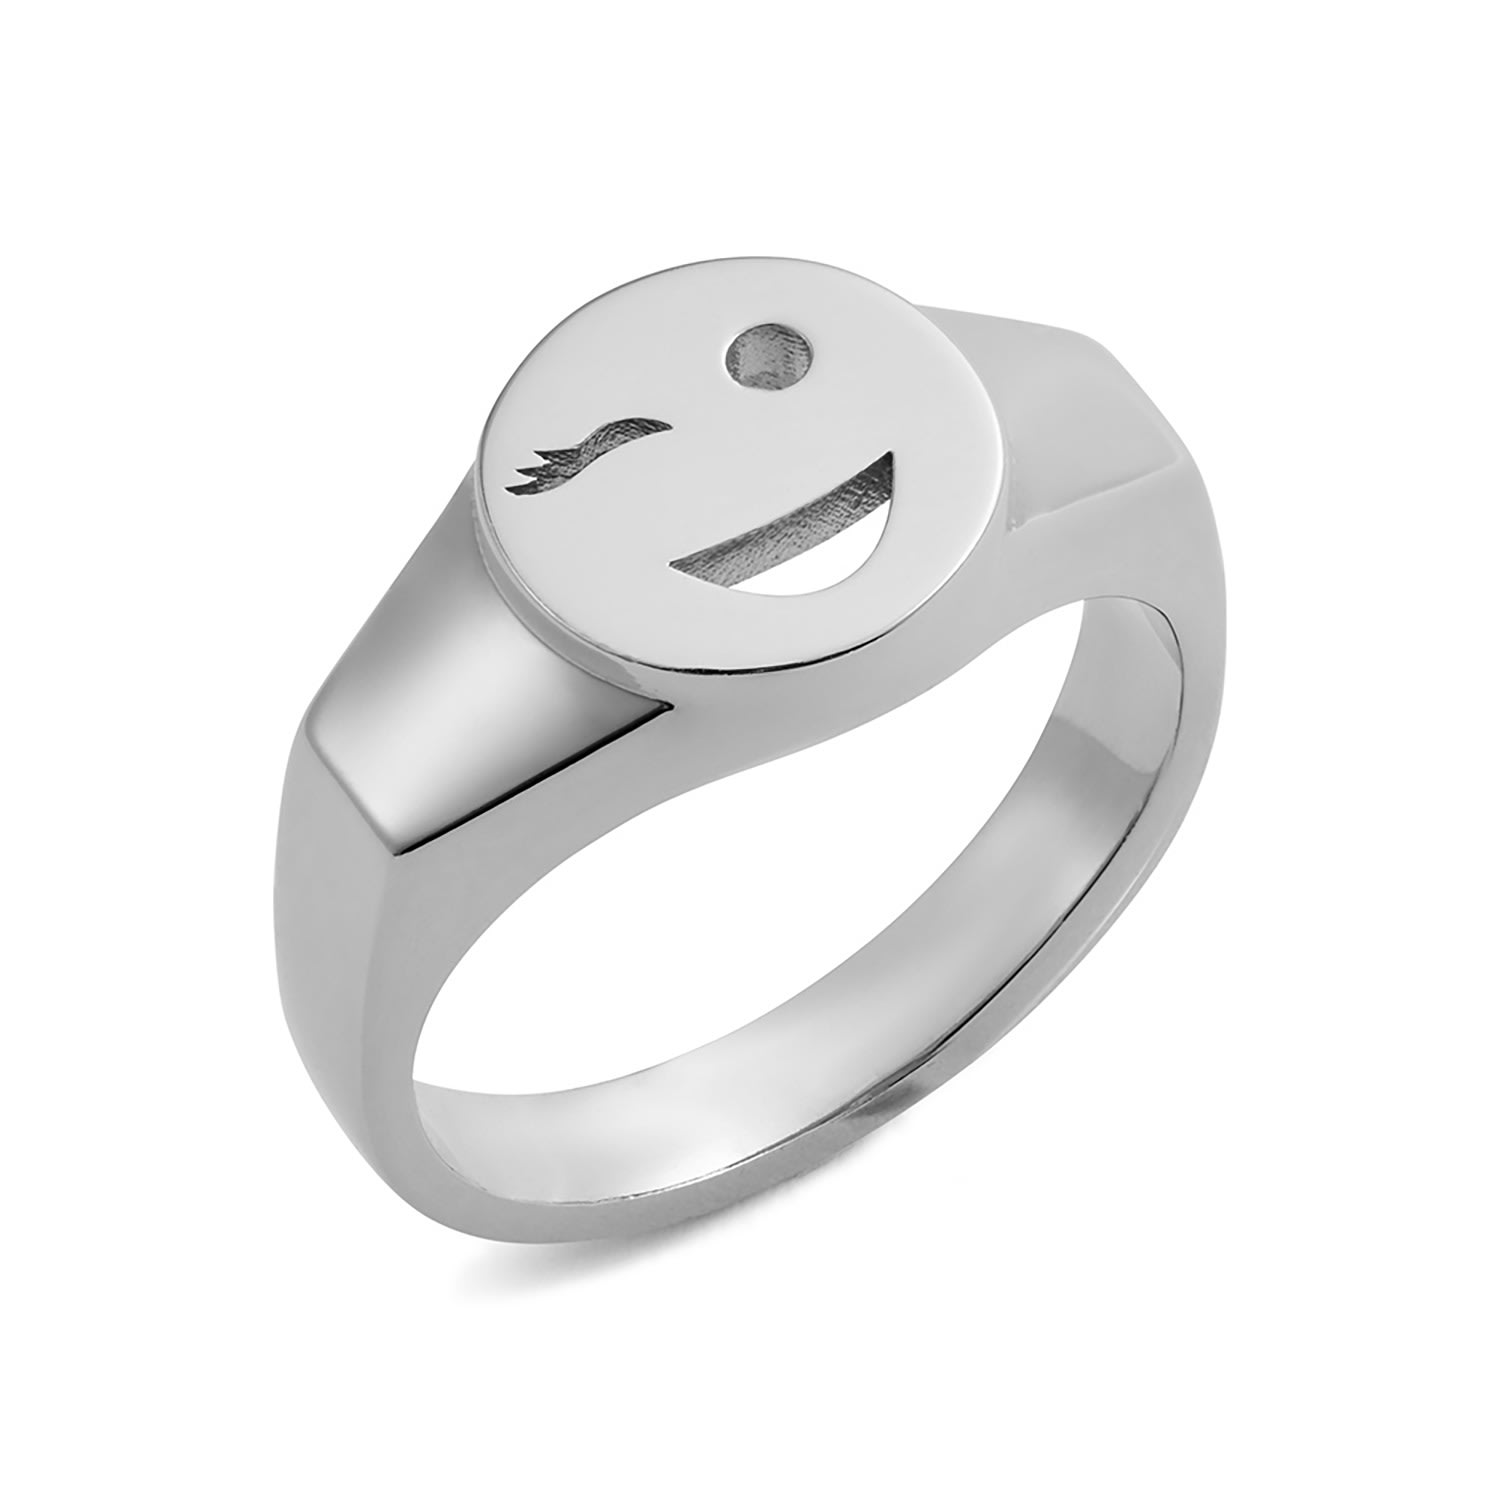 Toolally Women's Mood Signet Ring Wink - Silver In Green